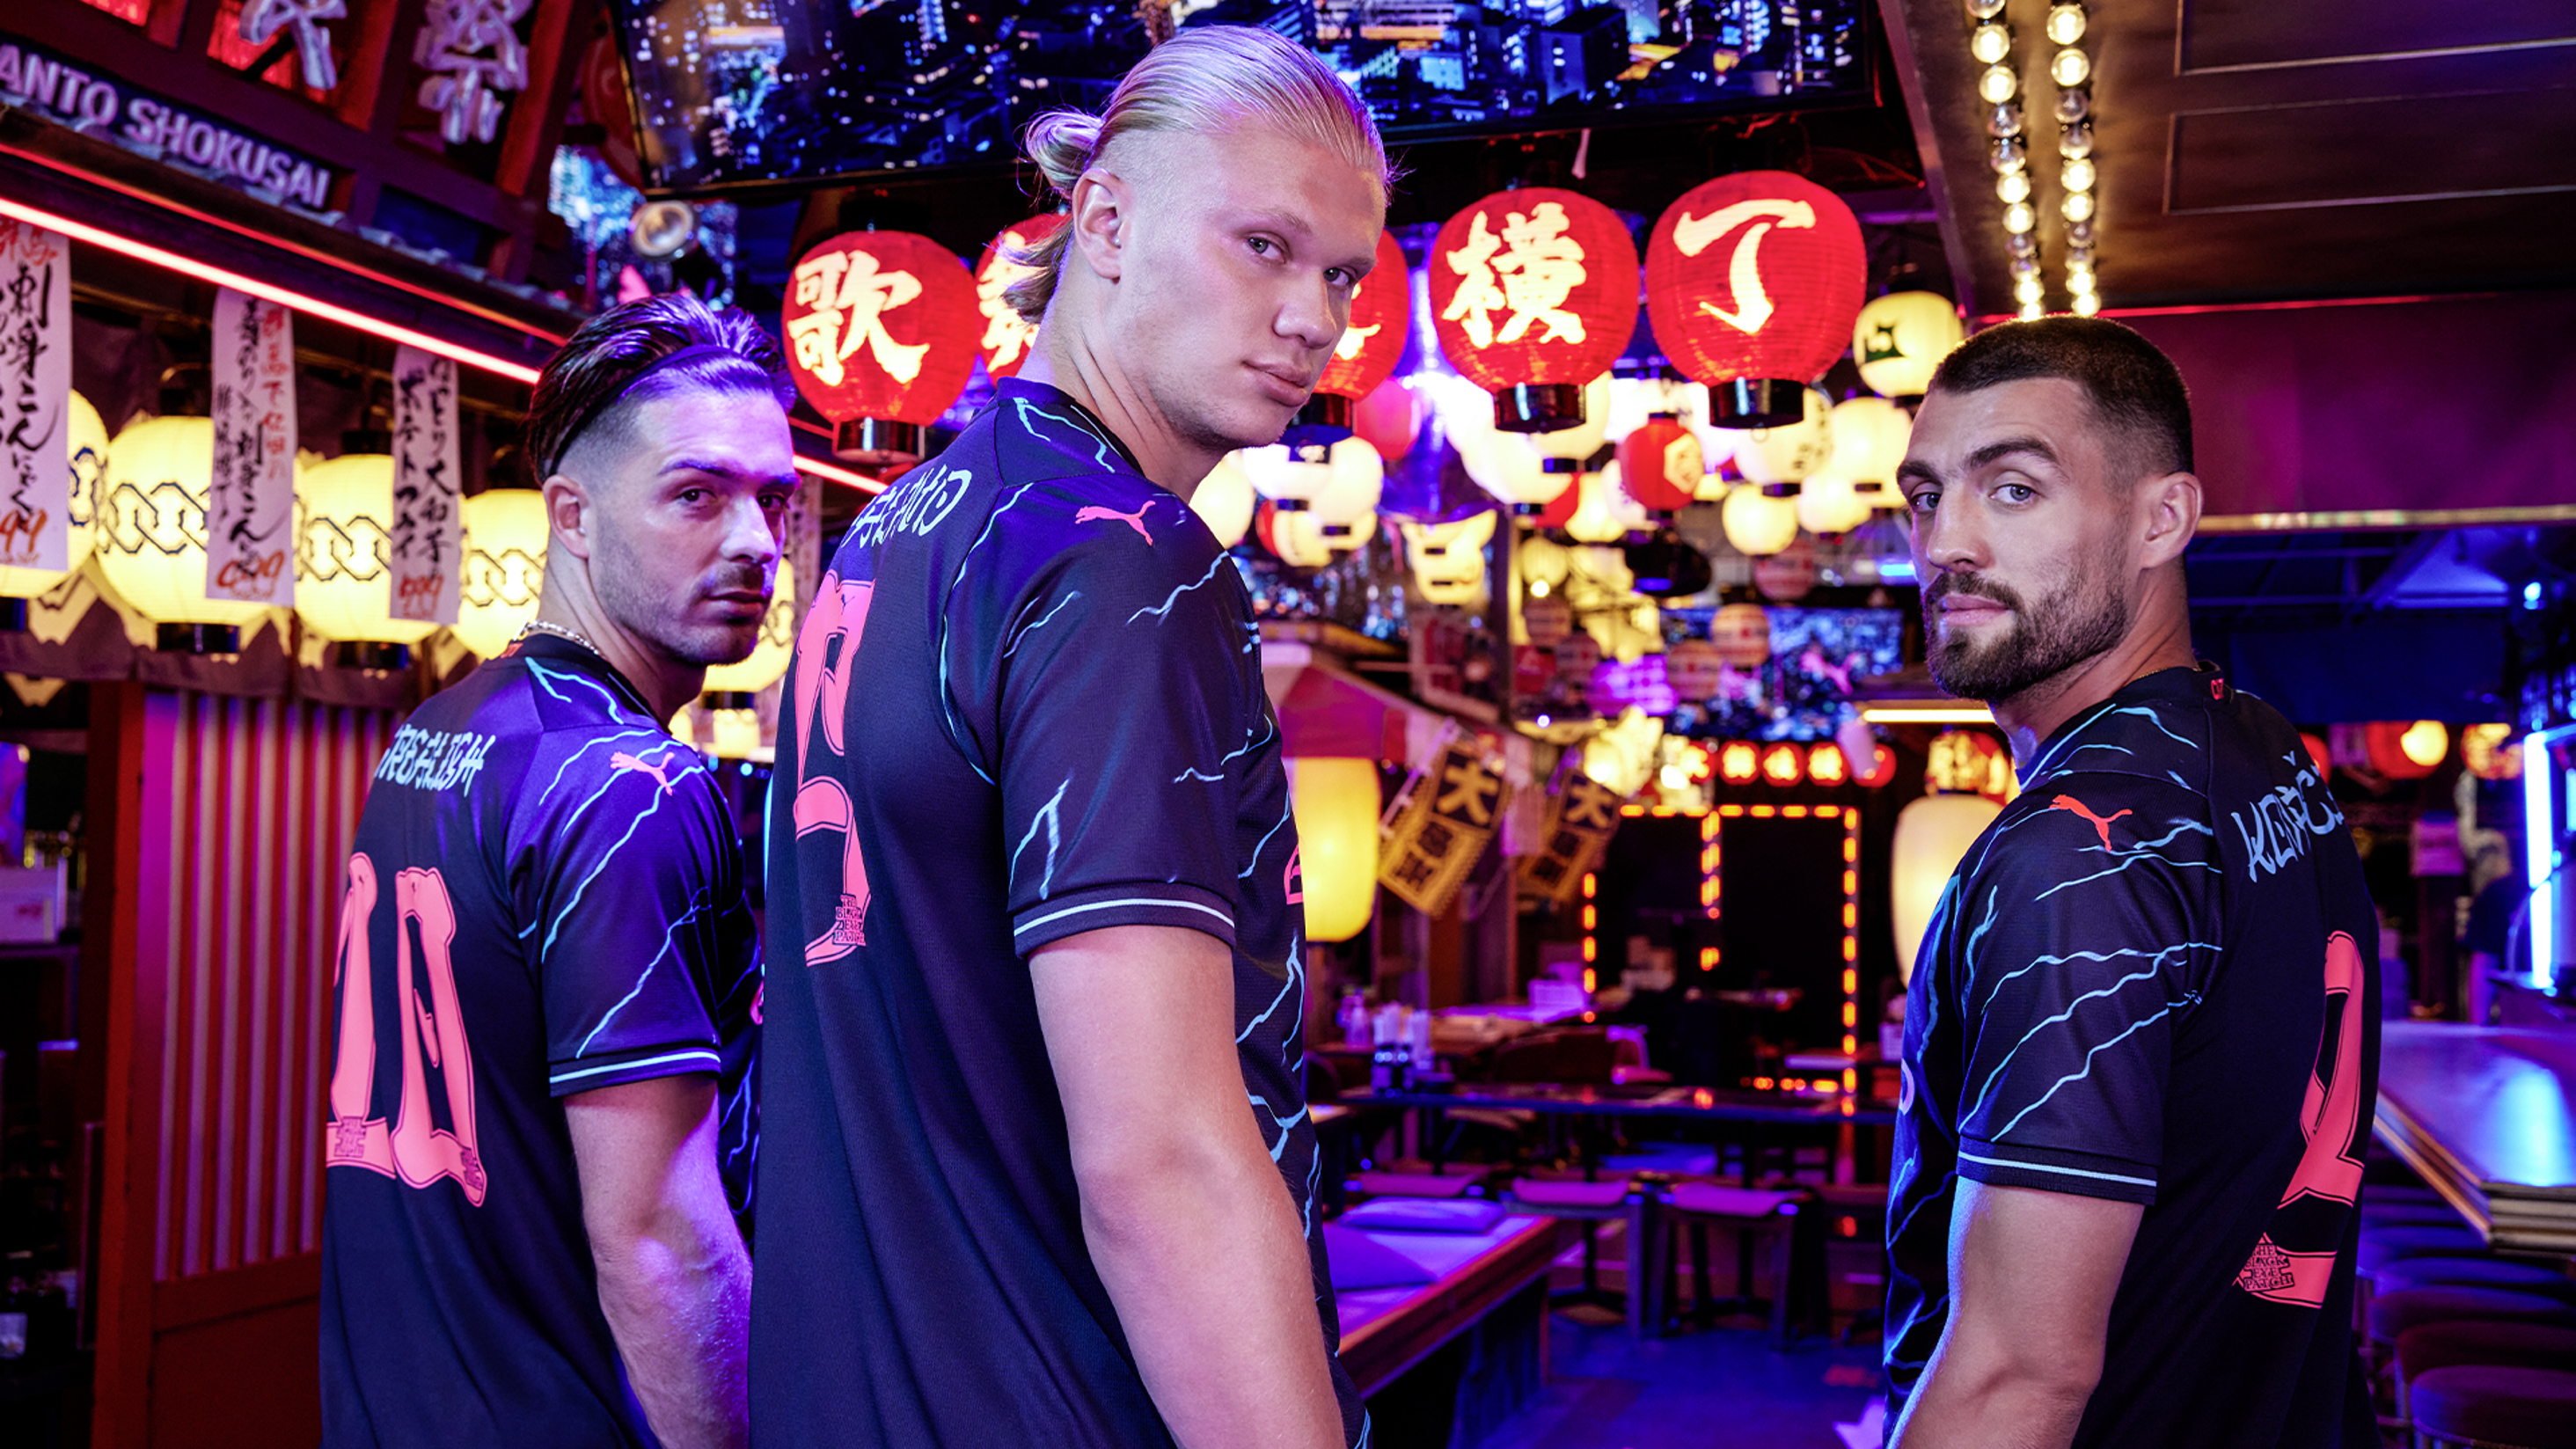 Gallery City unveil new 2023/24 PUMA third kit in Japan